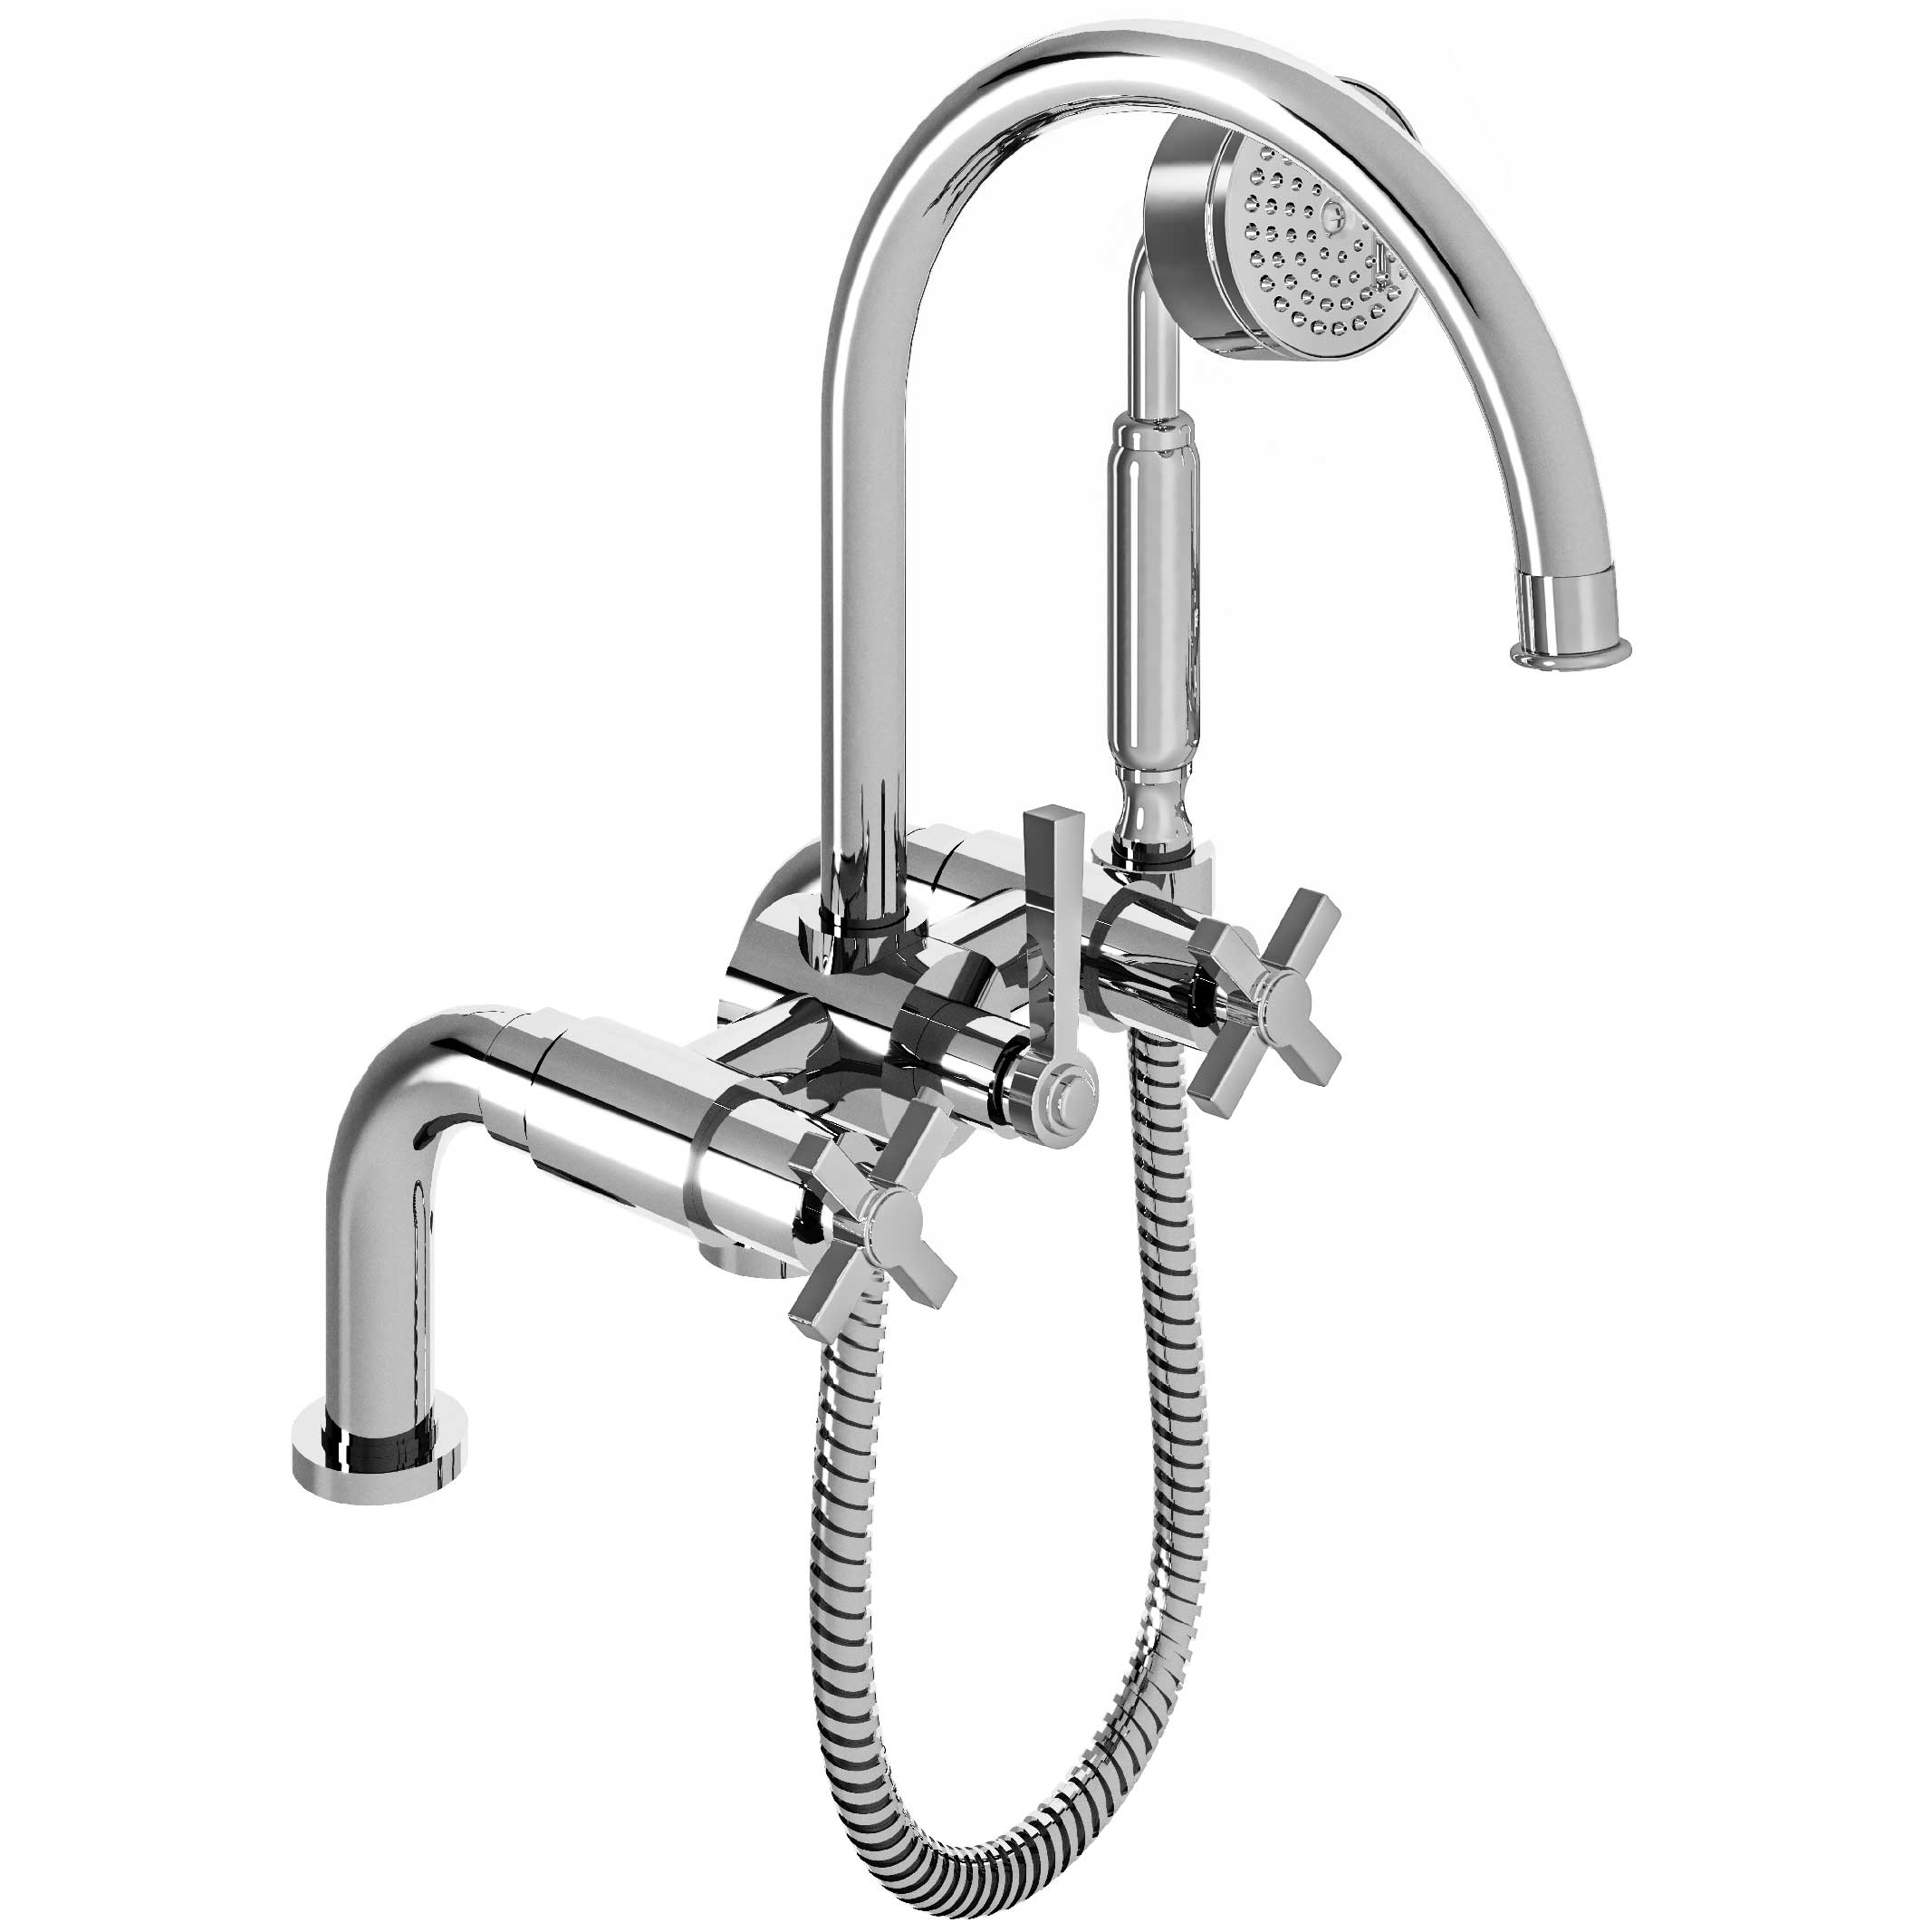 M60-3306 Rim mounted bath and shower mixer